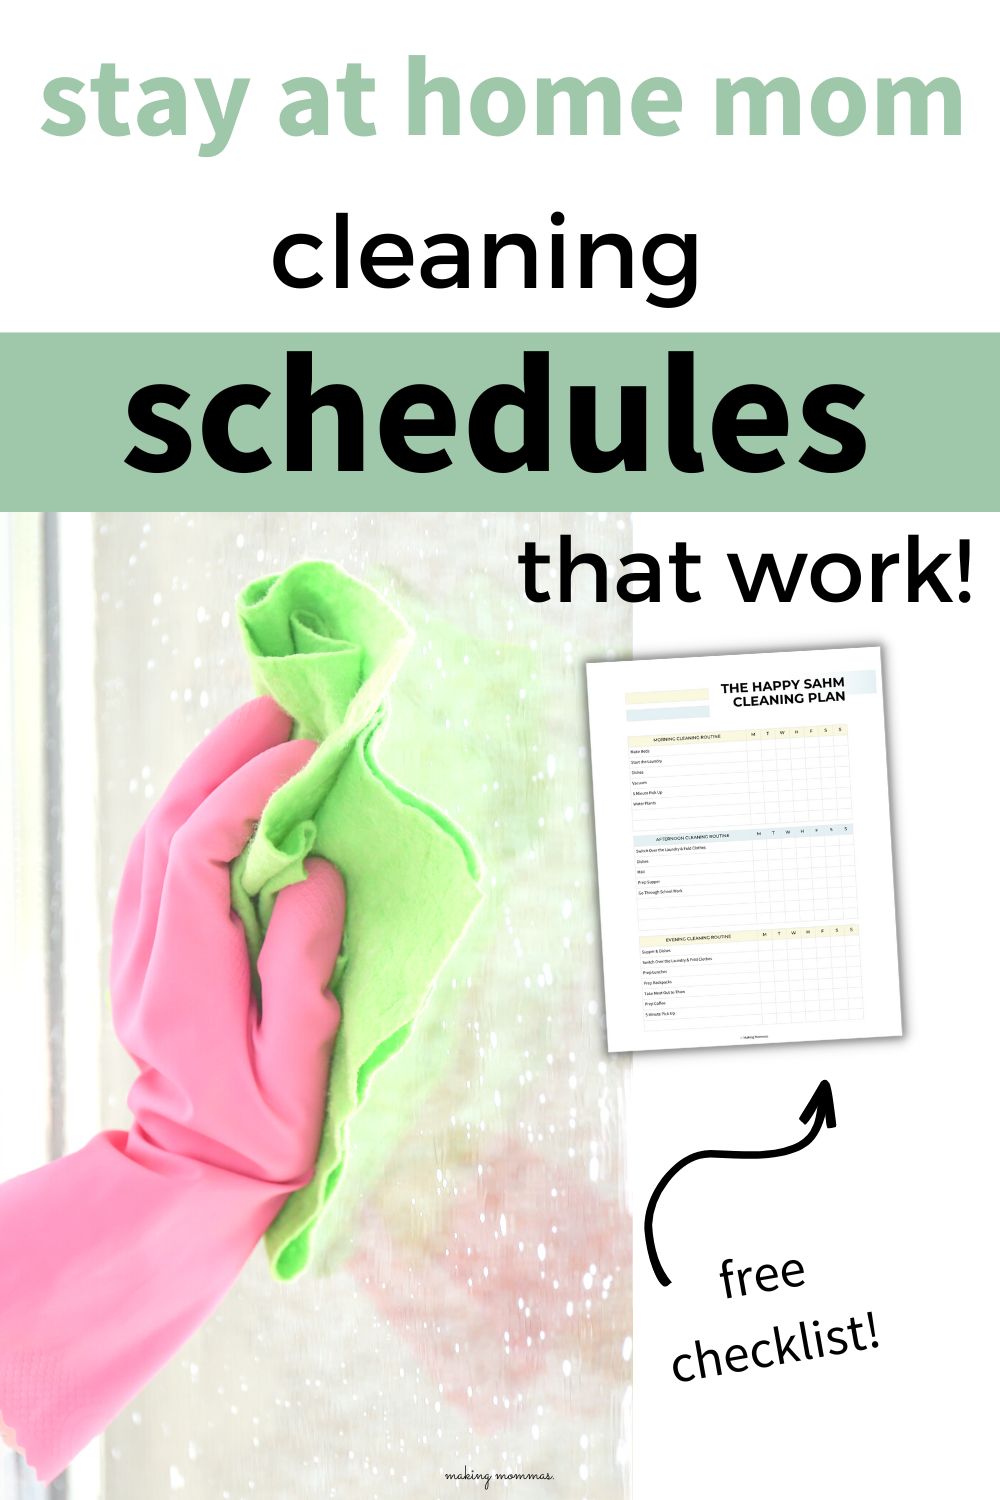 image of stay at home mom cleaning schedules that work